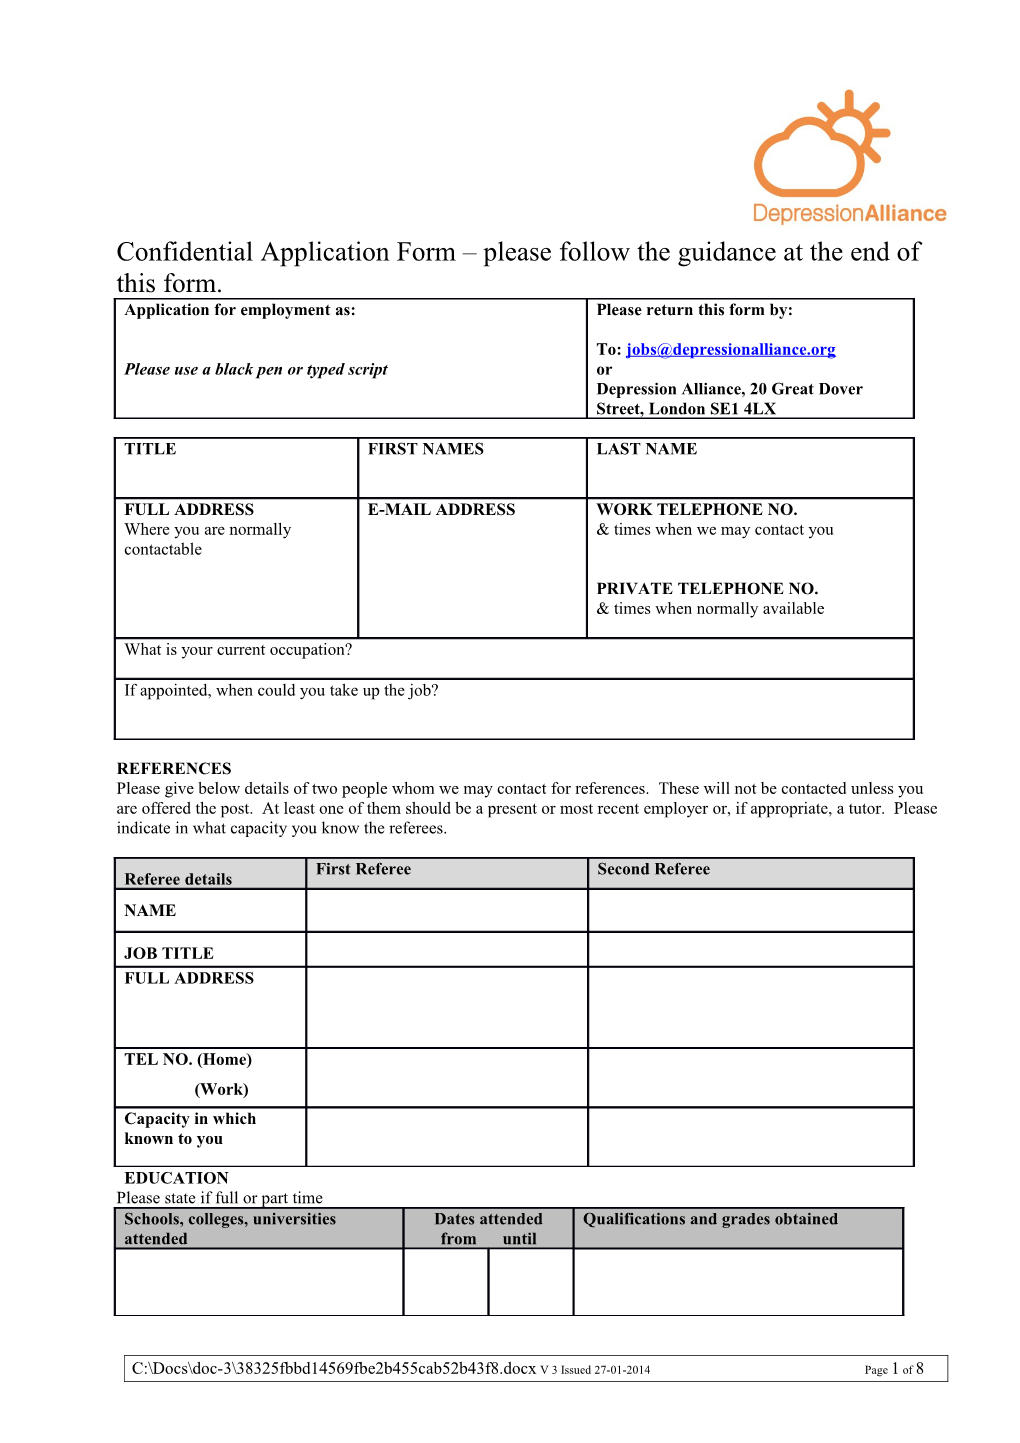 Confidential Application Form Please Follow the Guidance at the End of This Form